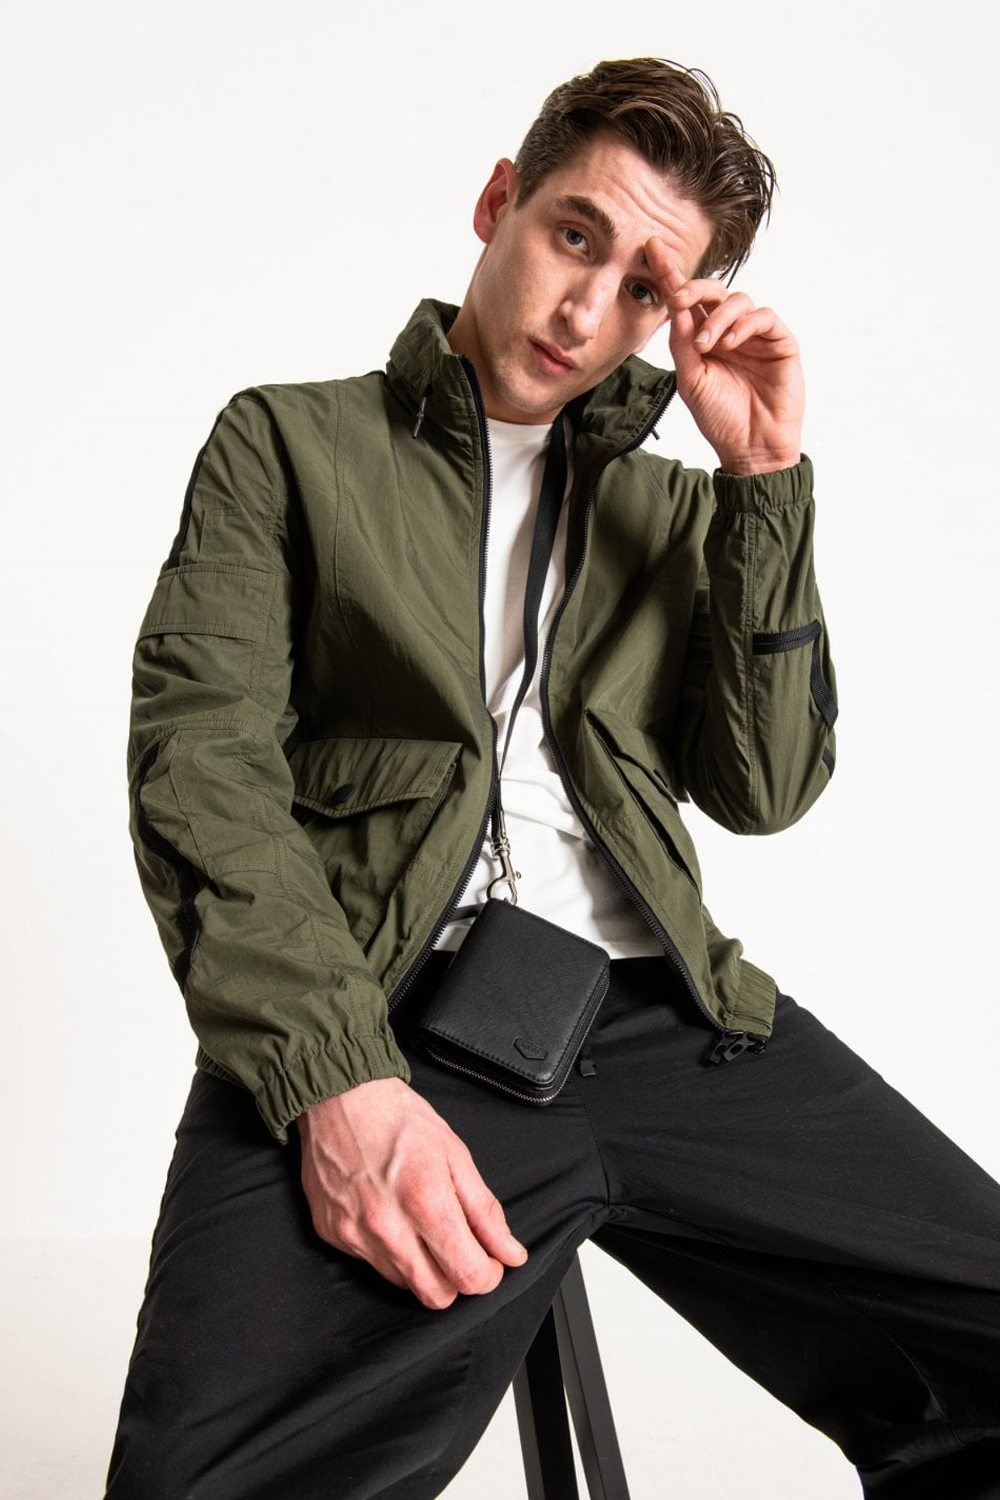 Buy the Antony Morato Multi Pocket Bomber Jacket Khaki at Intro. Spend £50 for free UK delivery. Official stockists. We ship worldwide.